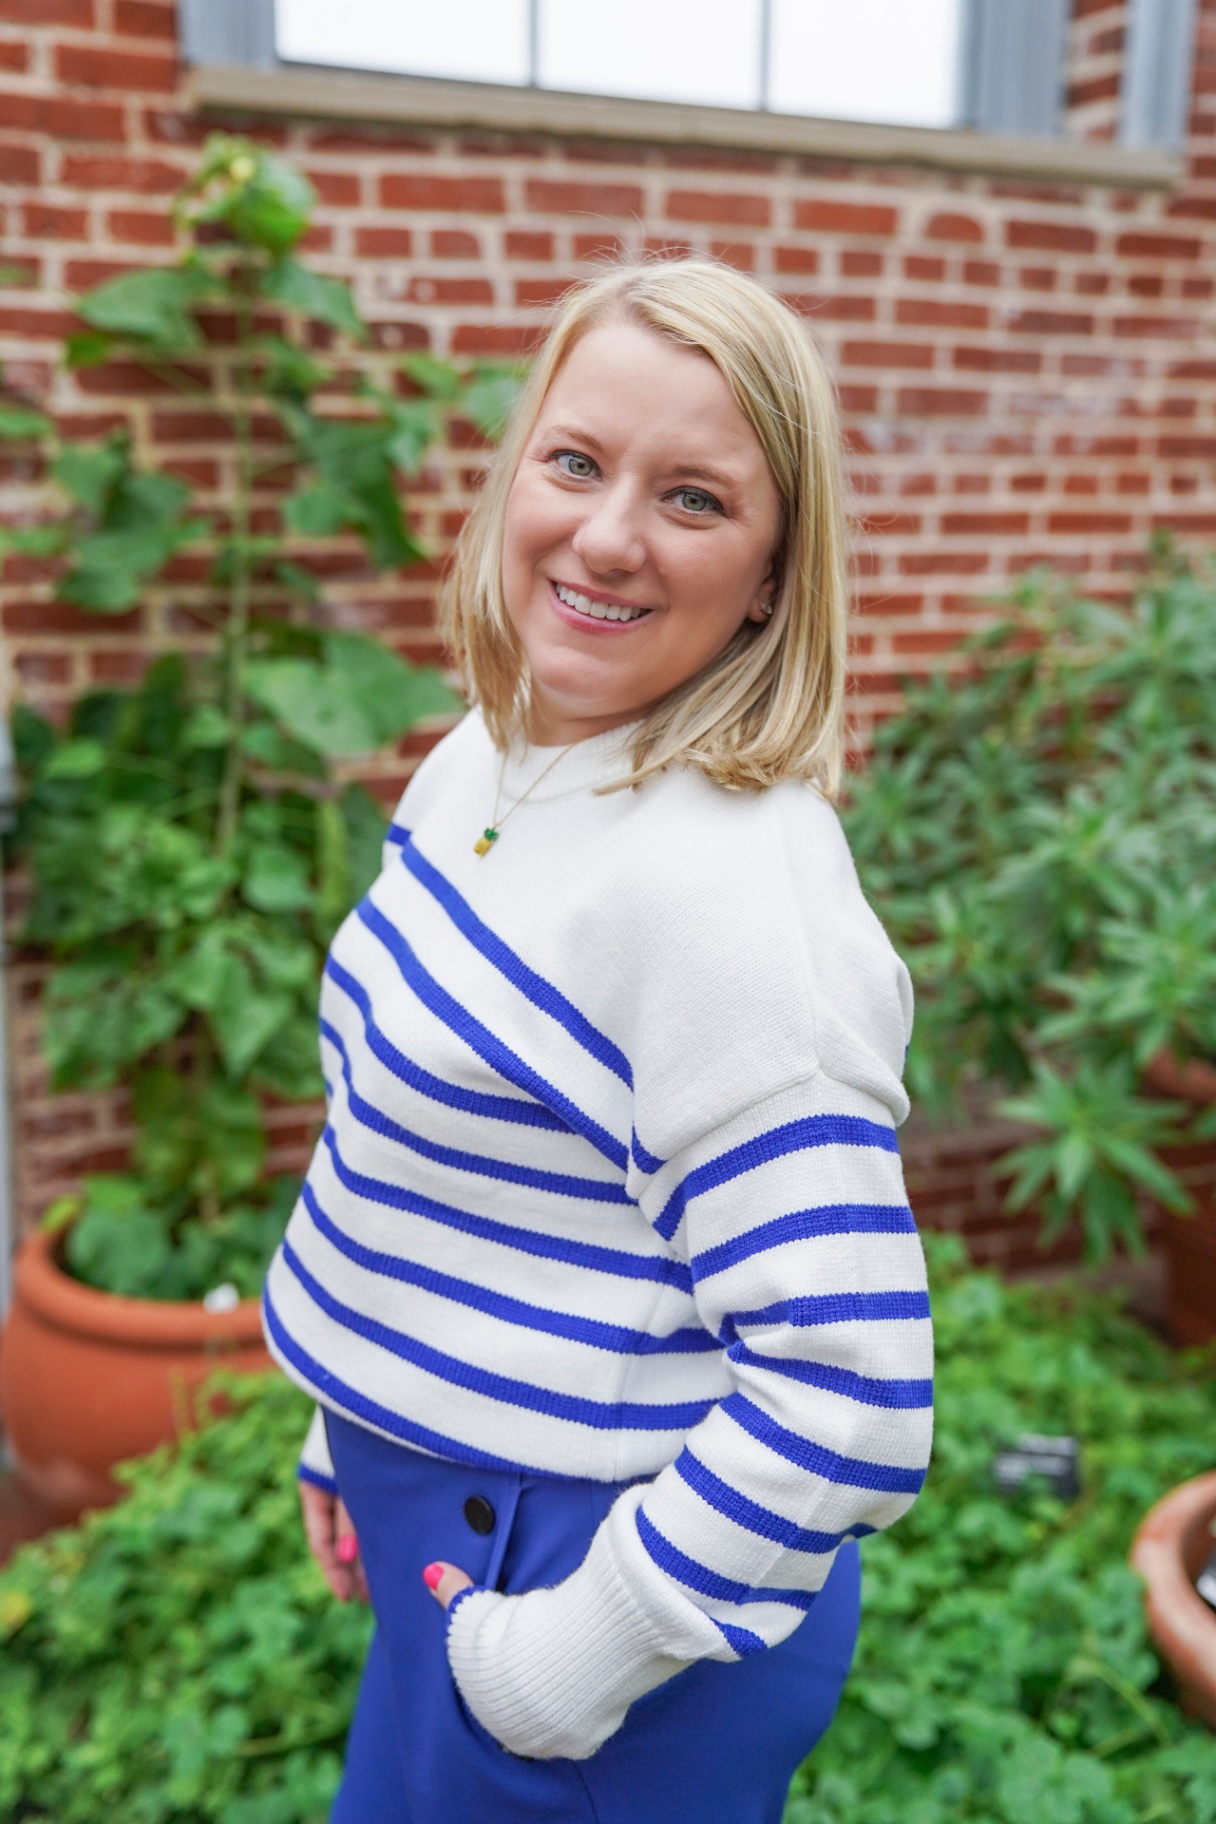 blonde woman in a striped sweater standing amongst green plants Katheryn Barton LPC Kirkwood MO Uplift and Connect Counseling